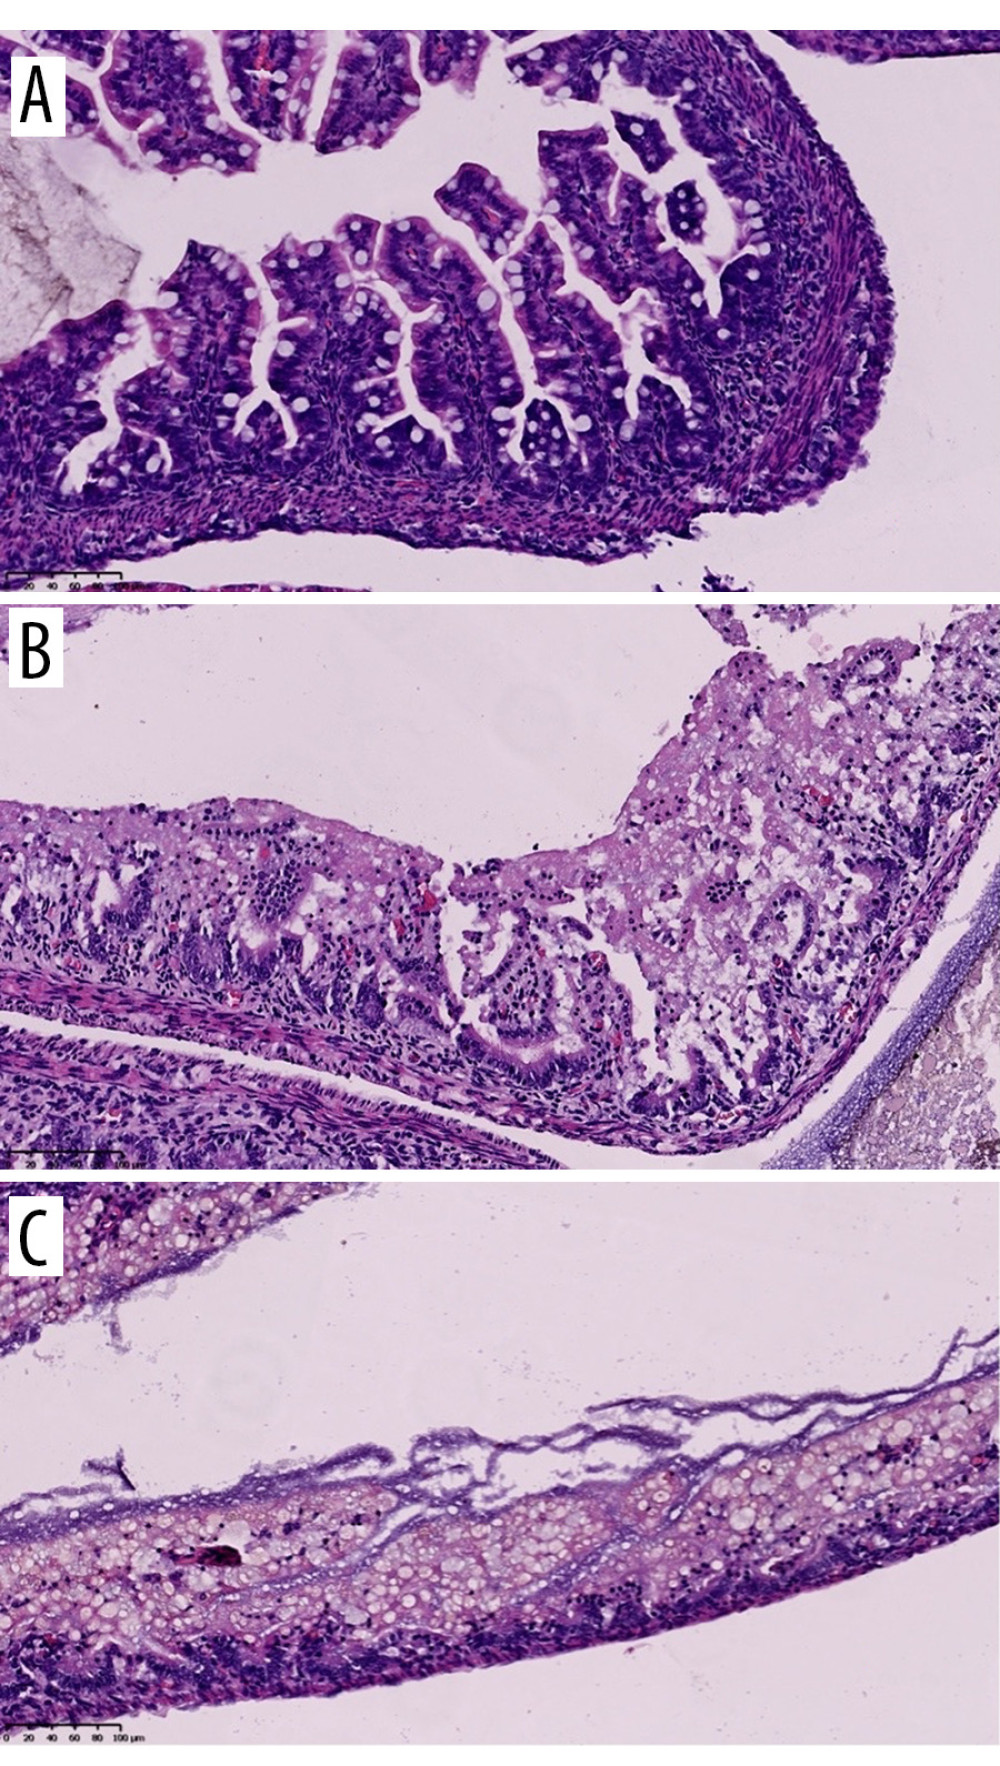 Histology: hematoxylin-eosin (HE) staining. Samples of the small intestine representing different levels of the NEC grading scale. A: grade 0 – normal intestine, B: grade I – submucosal and lamina propria separation with oedema of the submucosa, C: grade II – villi loss and necrosis. Source: Own materials, NDP.view2 software (Hamamatsu, Japan).